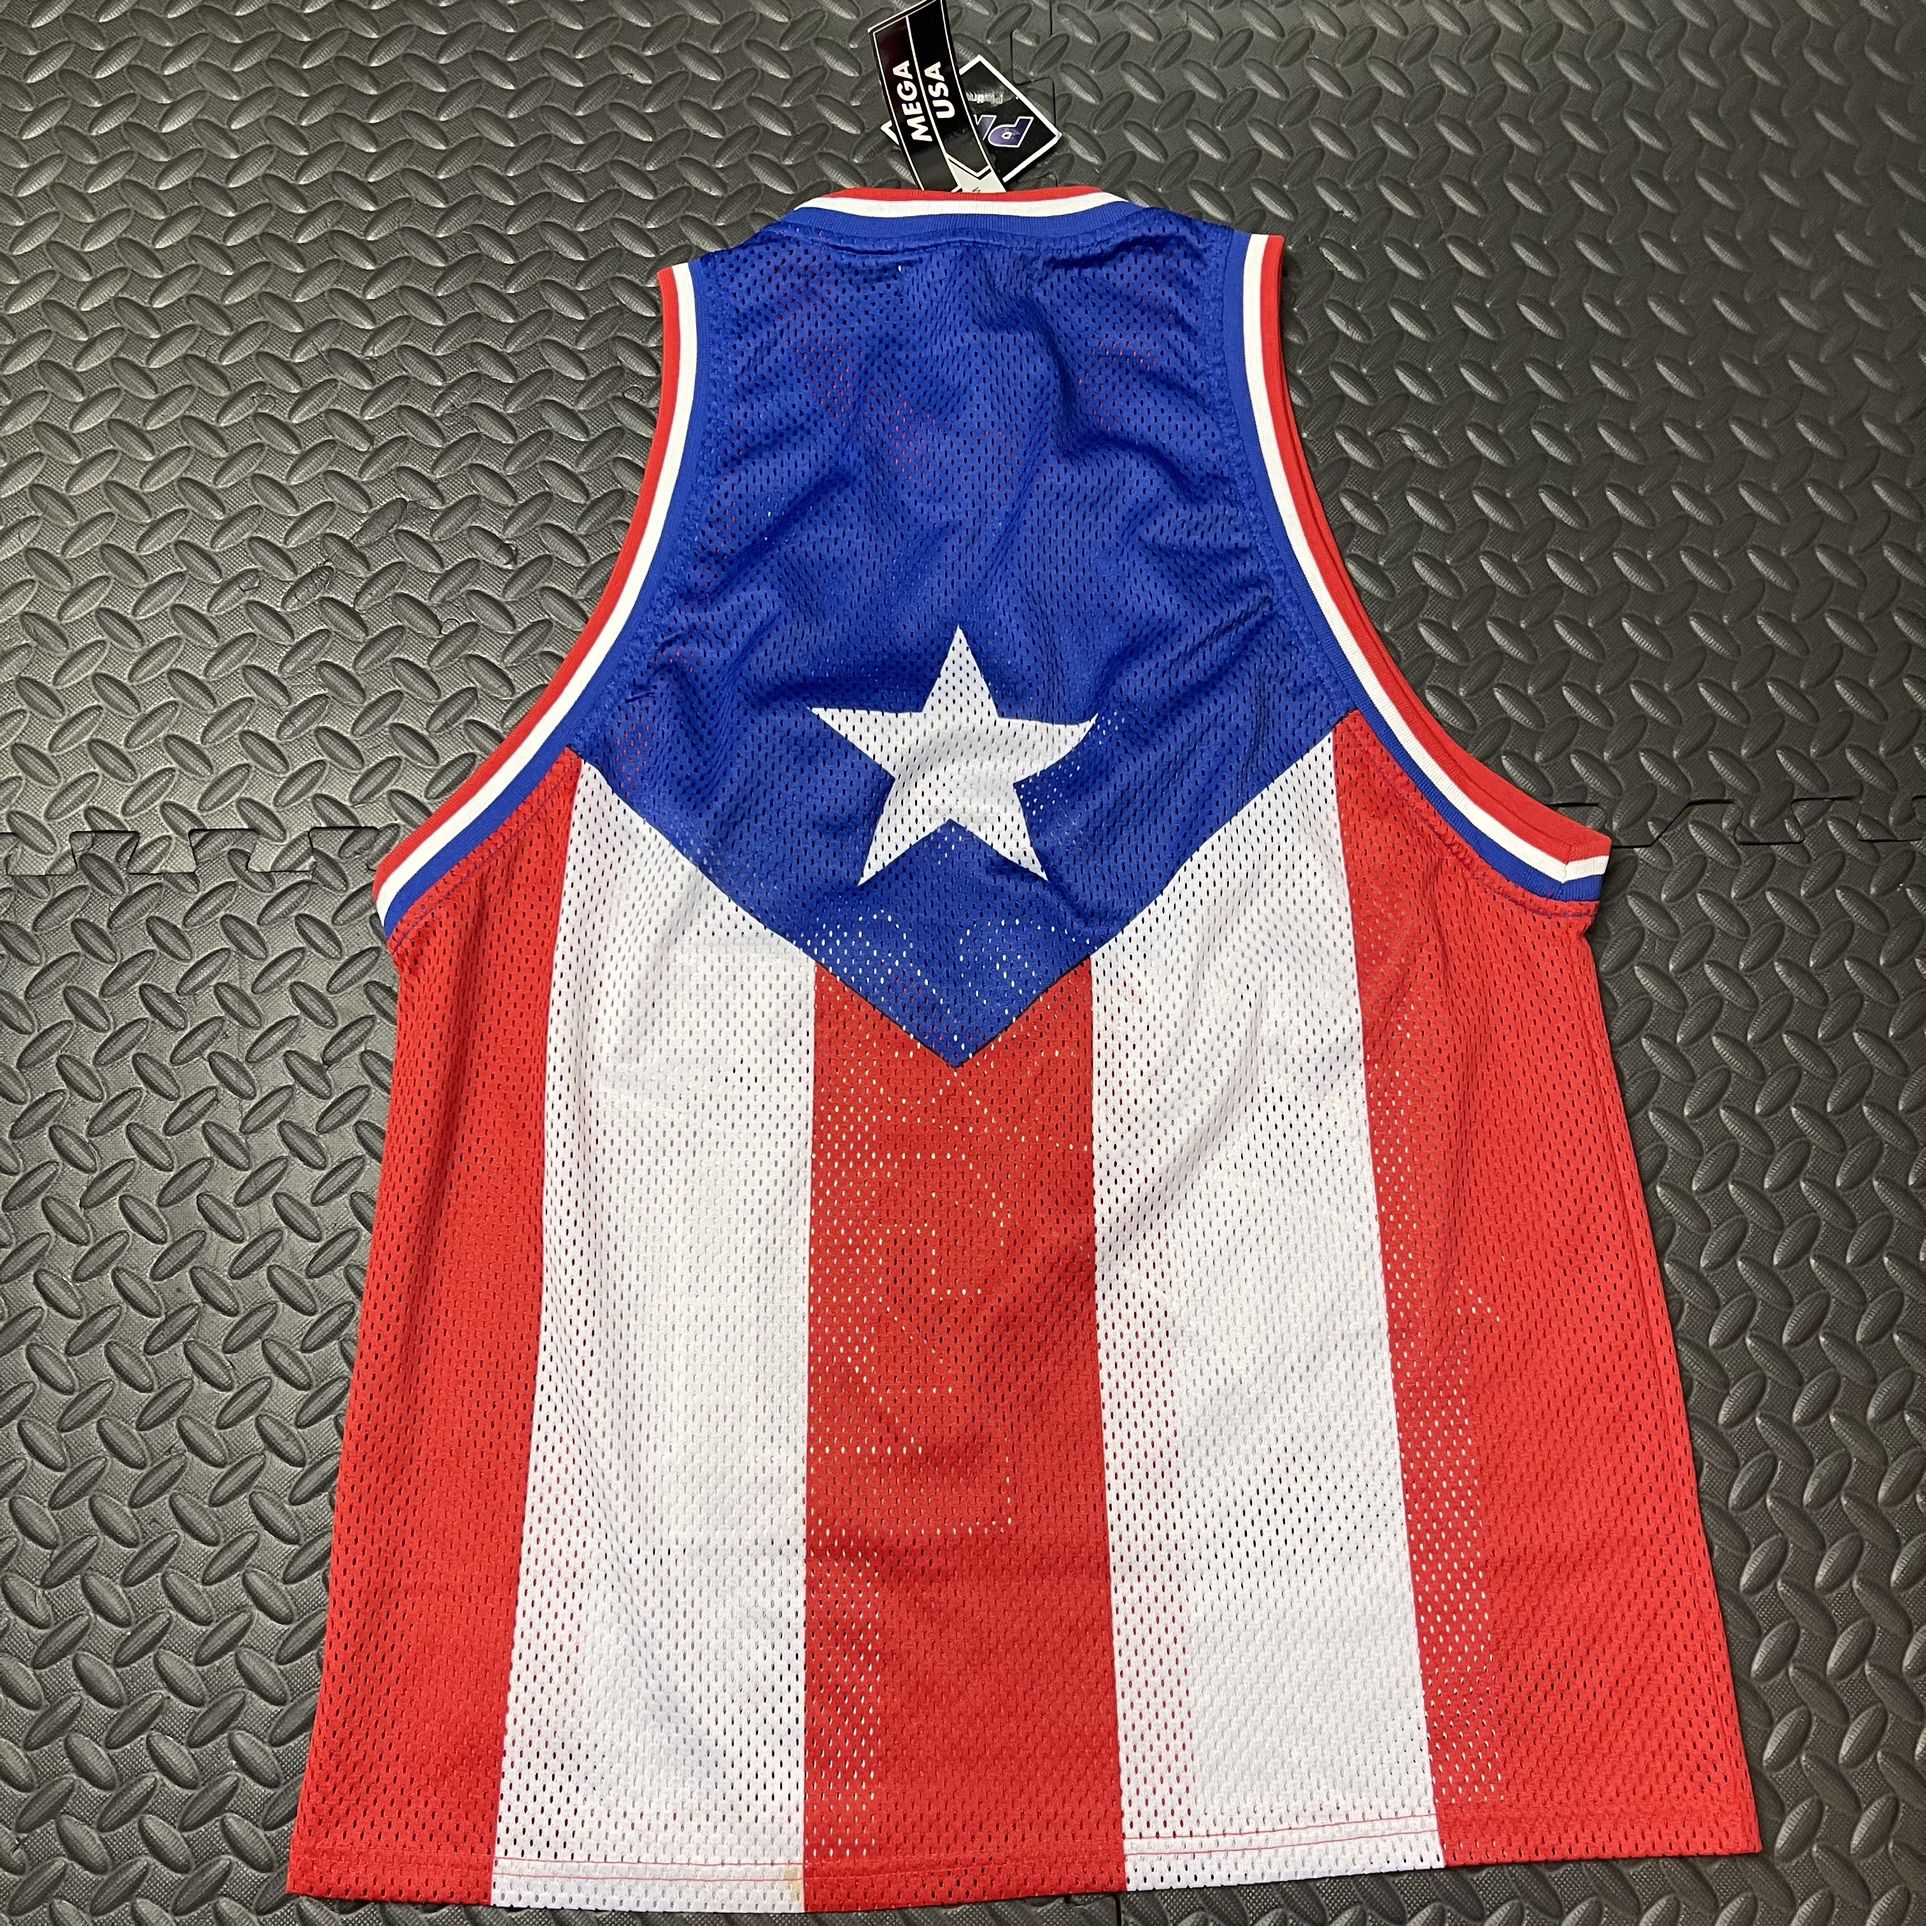 Authentic NBA Jerseys for Sale in Land O' Lakes, FL - OfferUp